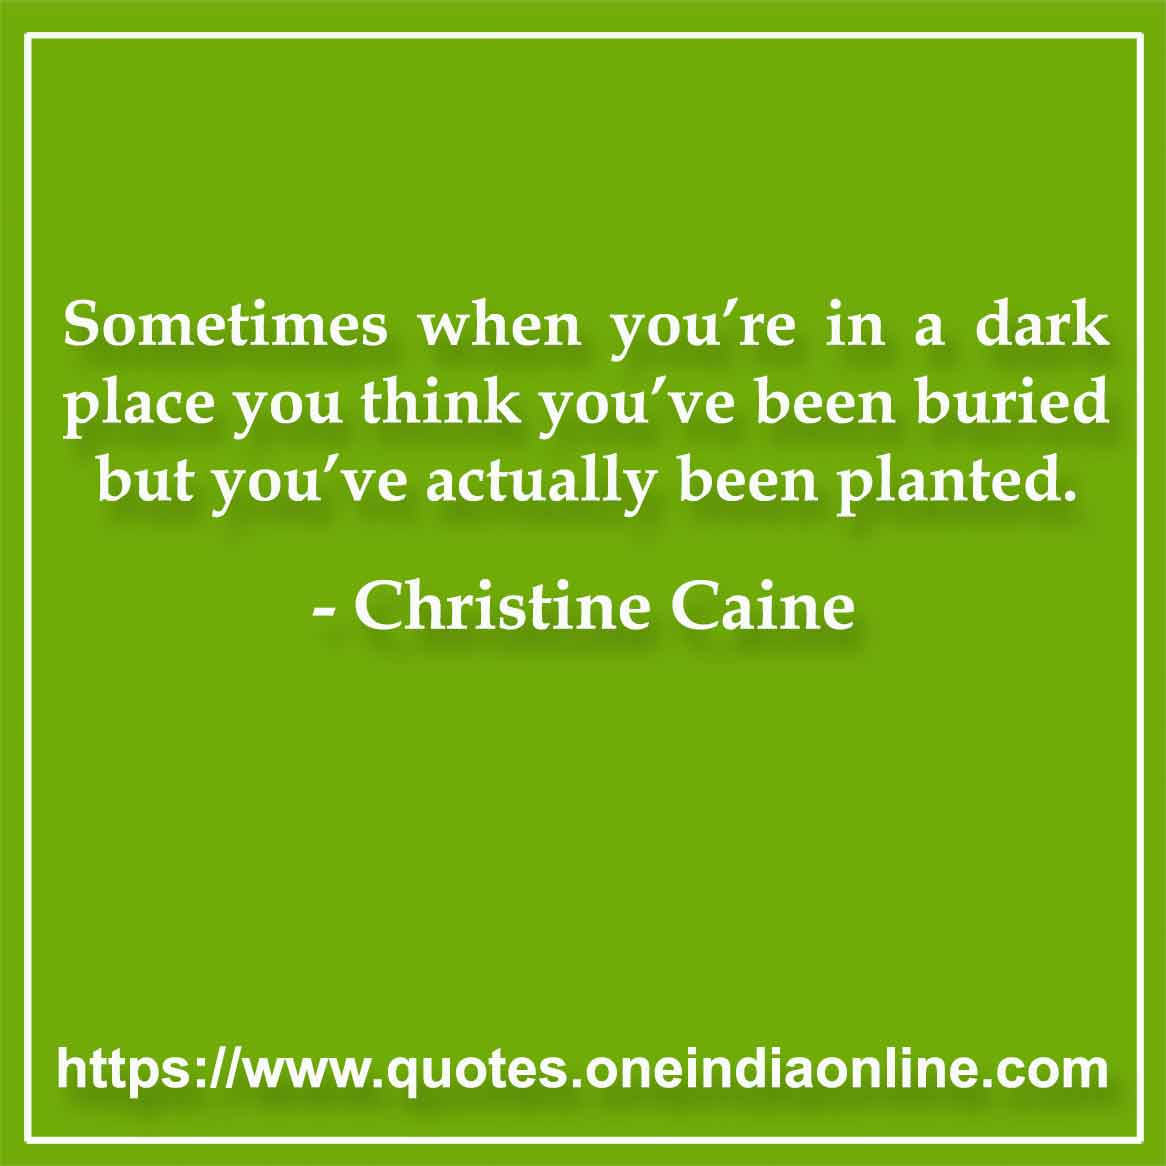 Sometimes when you’re in a dark place you think you’ve been buried but you’ve actually been planted.

-  Christine Caine